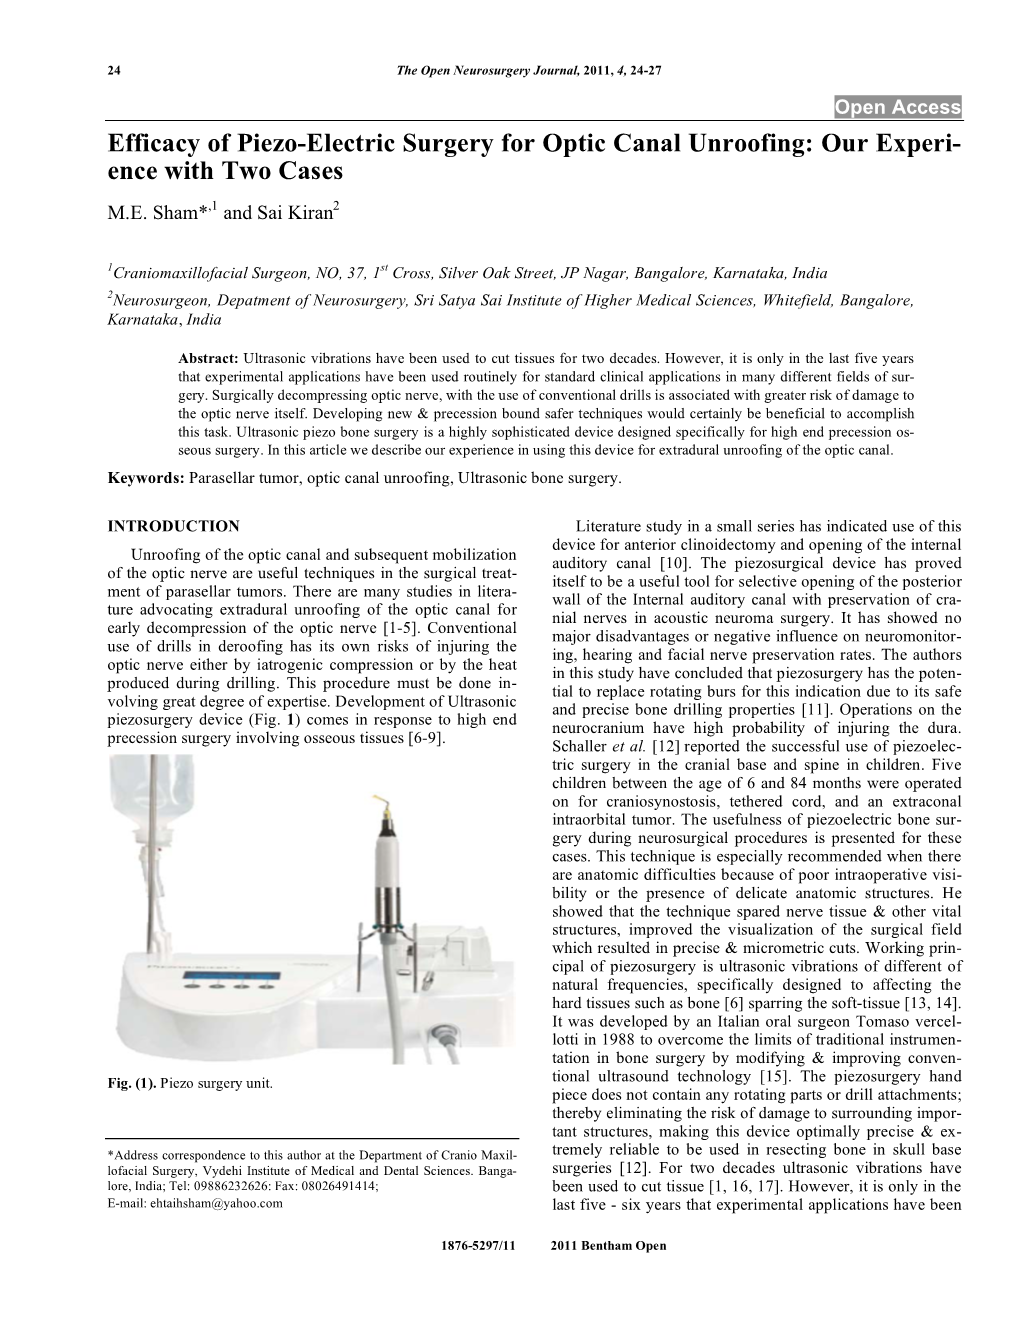 Efficacy of Piezo-Electric Surgery for Optic Canal Unroofing: Our Experi- Ence with Two Cases M.E